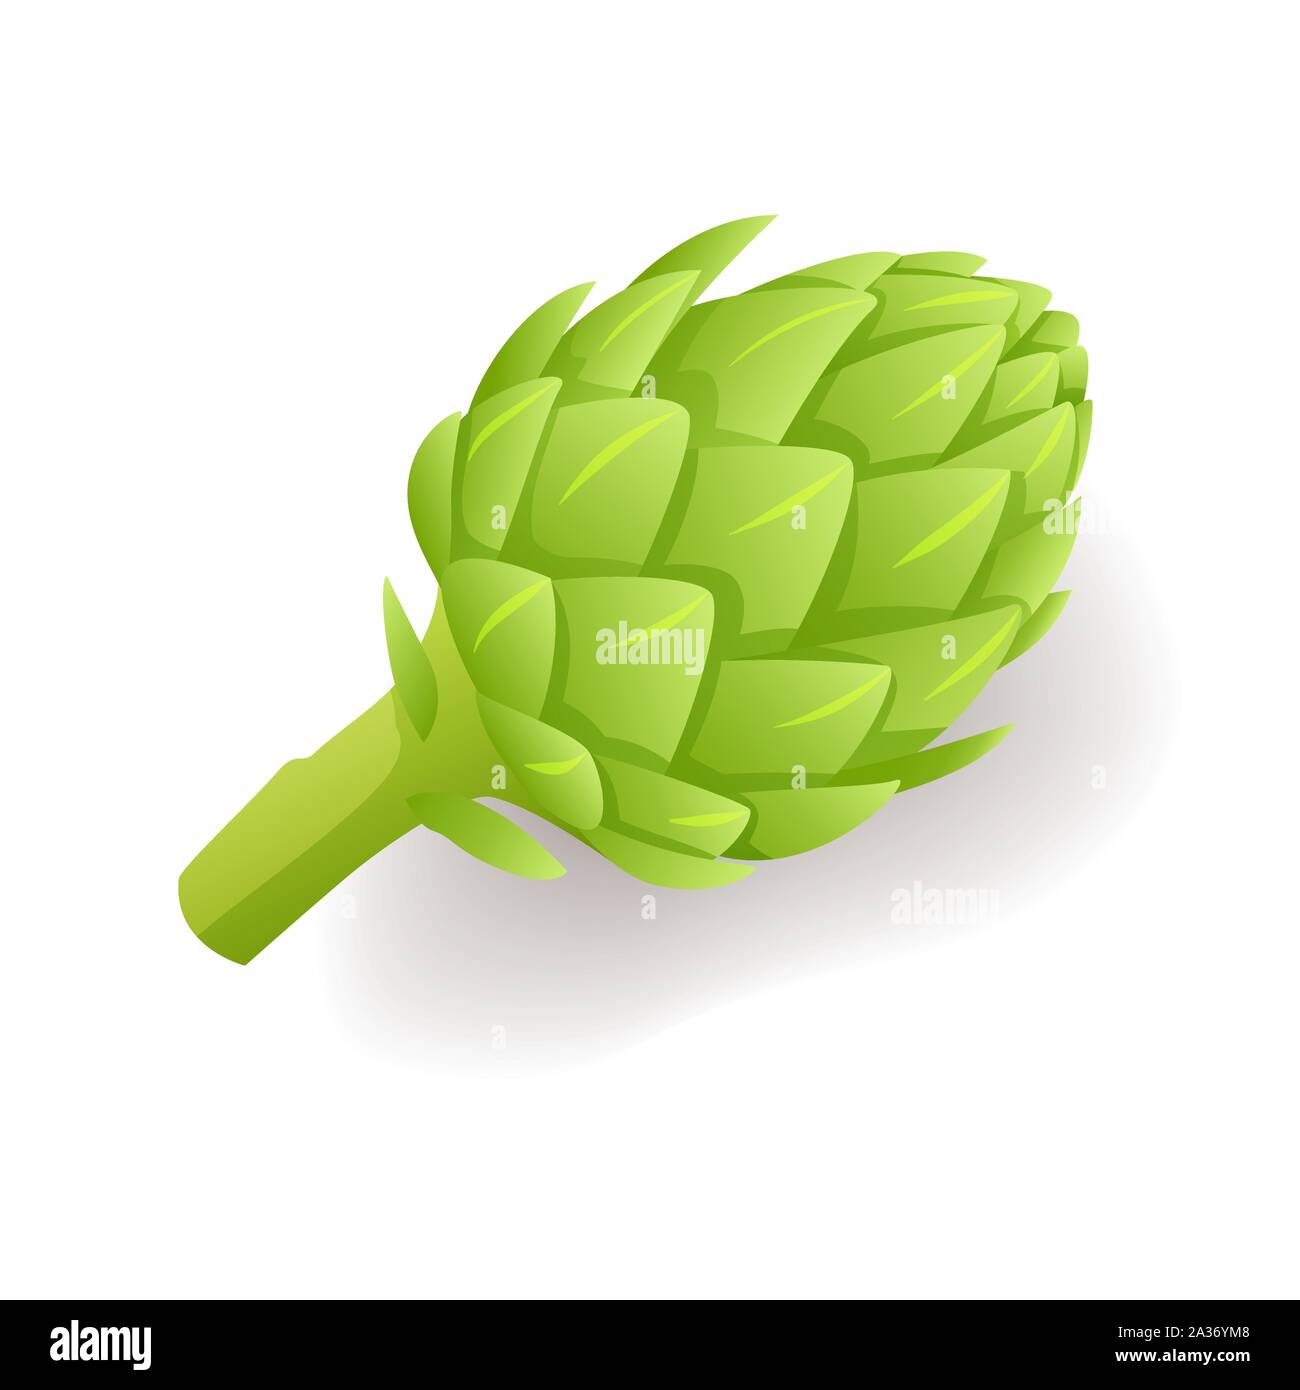 Green artichoke icon, fresh natural vegetable isolated on white background, vector illustration. Stock Vector